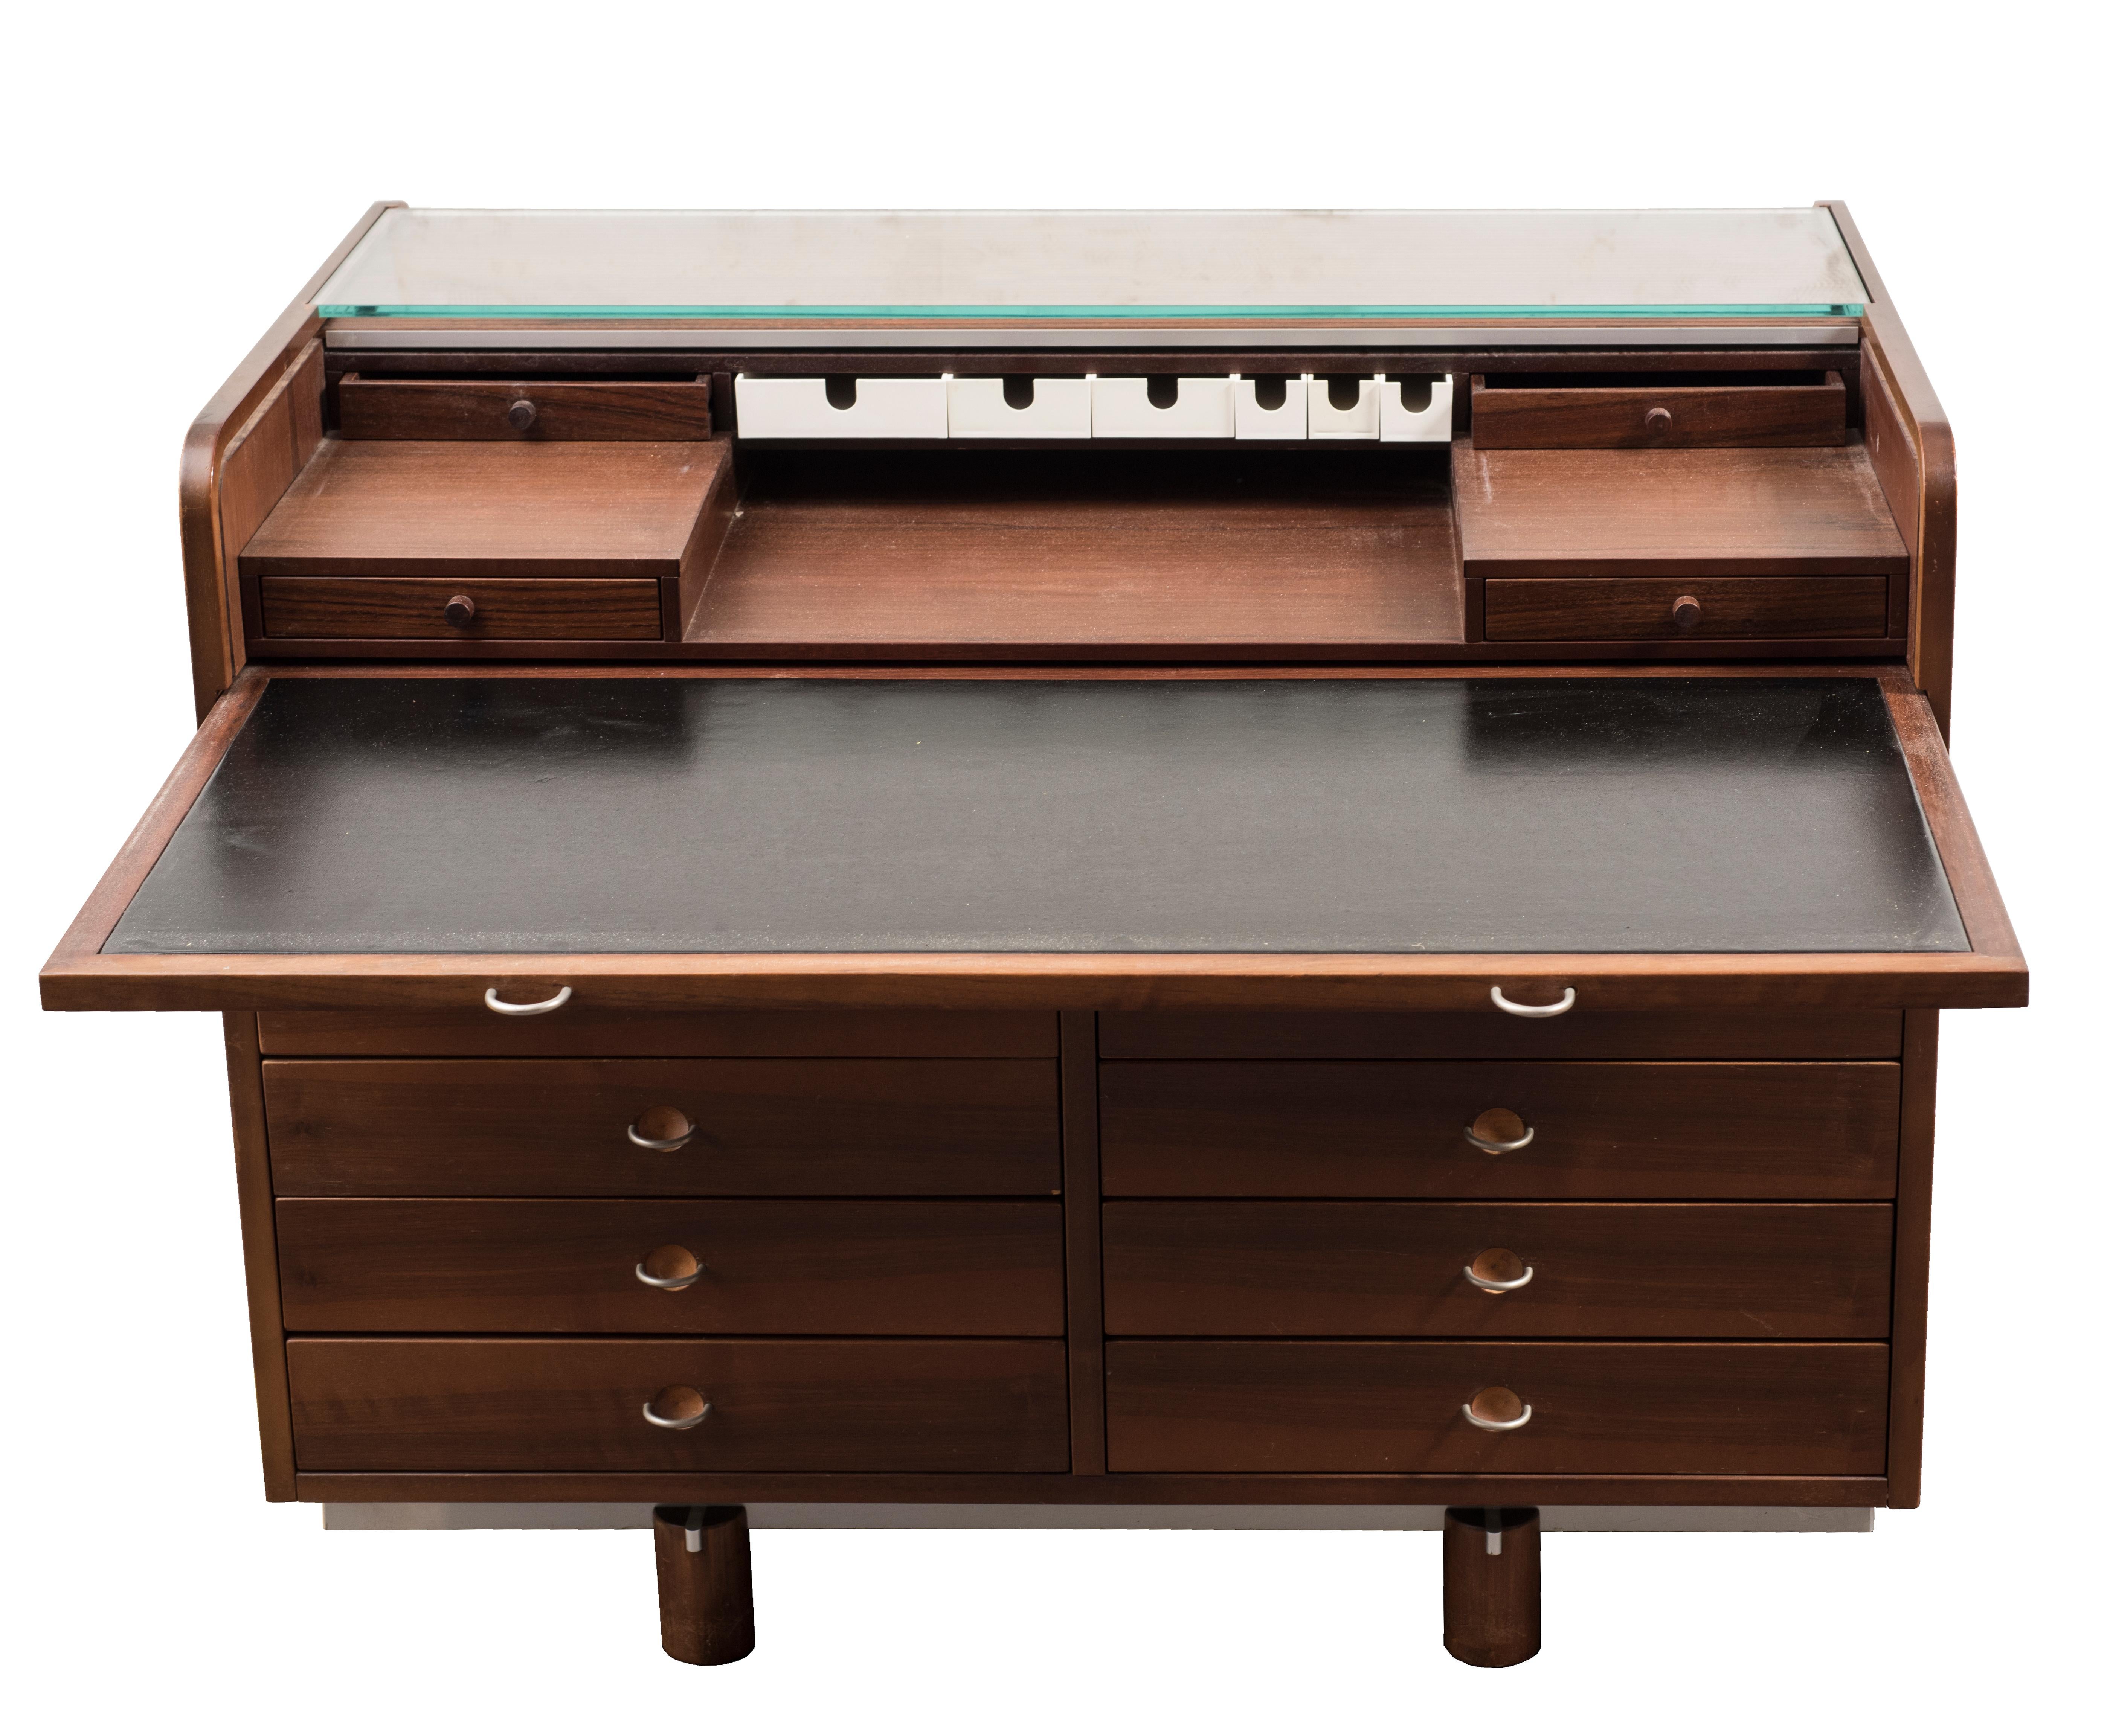 This roller desk is a walnut-veneered wooden desk, chrome-plated metal, presenting an opening compartment with the extraction of the working leather-wrapped plane, realized by Bernini around 1967. In very good conditions.

A very enchanting and